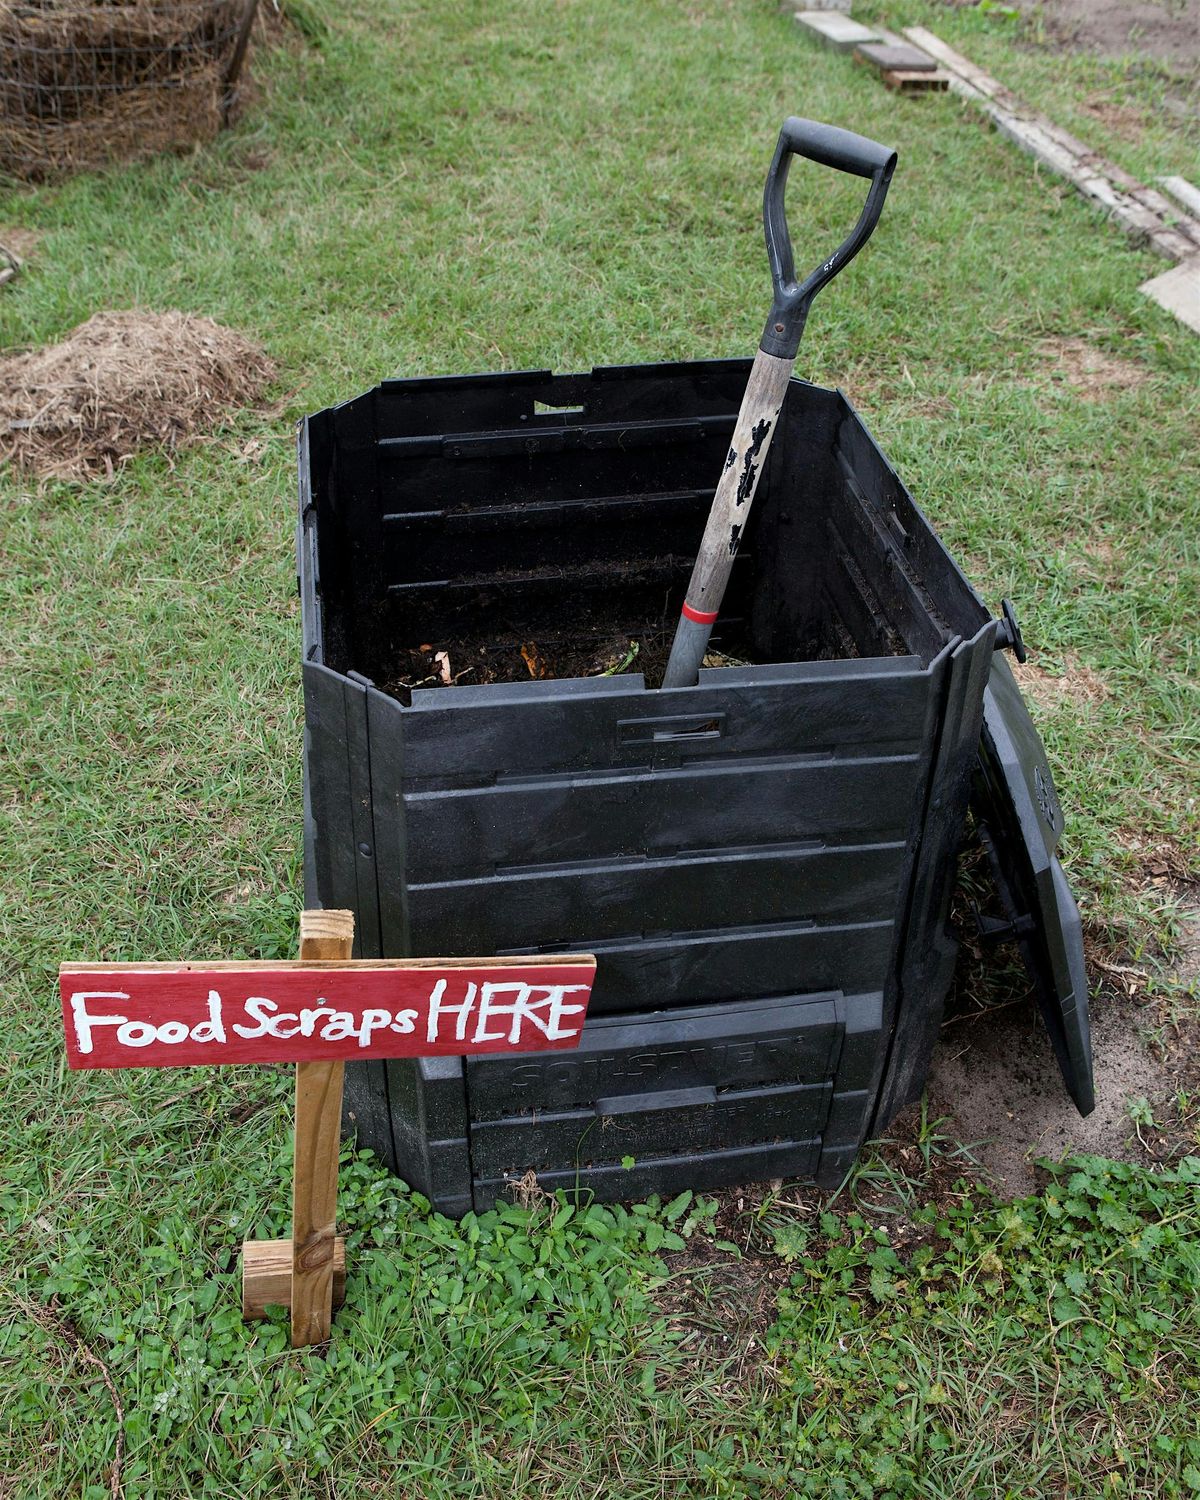 Compost Tips for Home and Garden